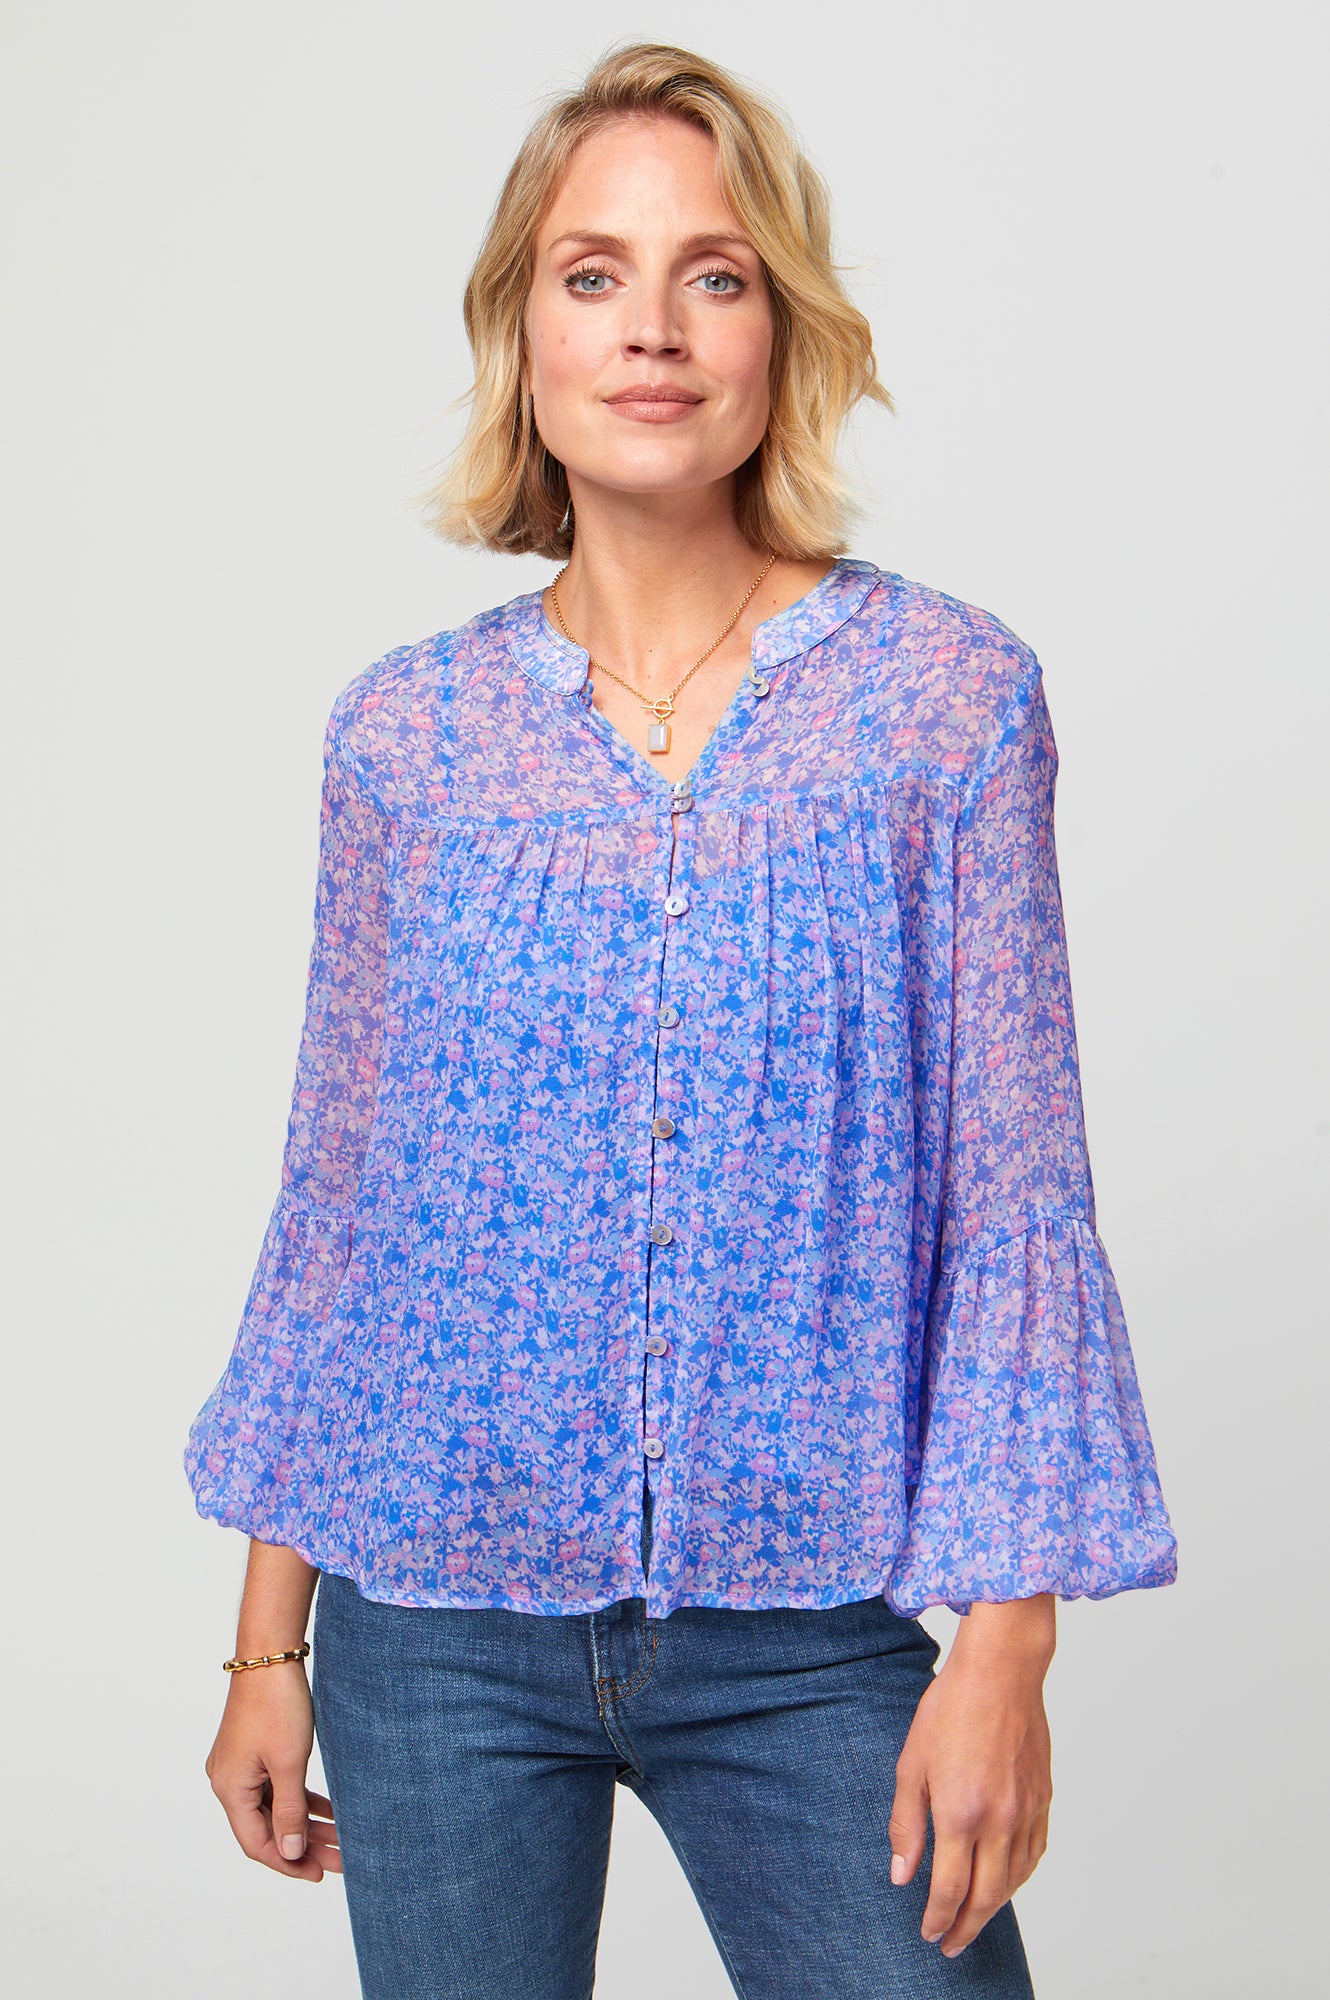 Ethical Beatrice Blouse Pink Digital Floral XS-XL Viscose GGT 